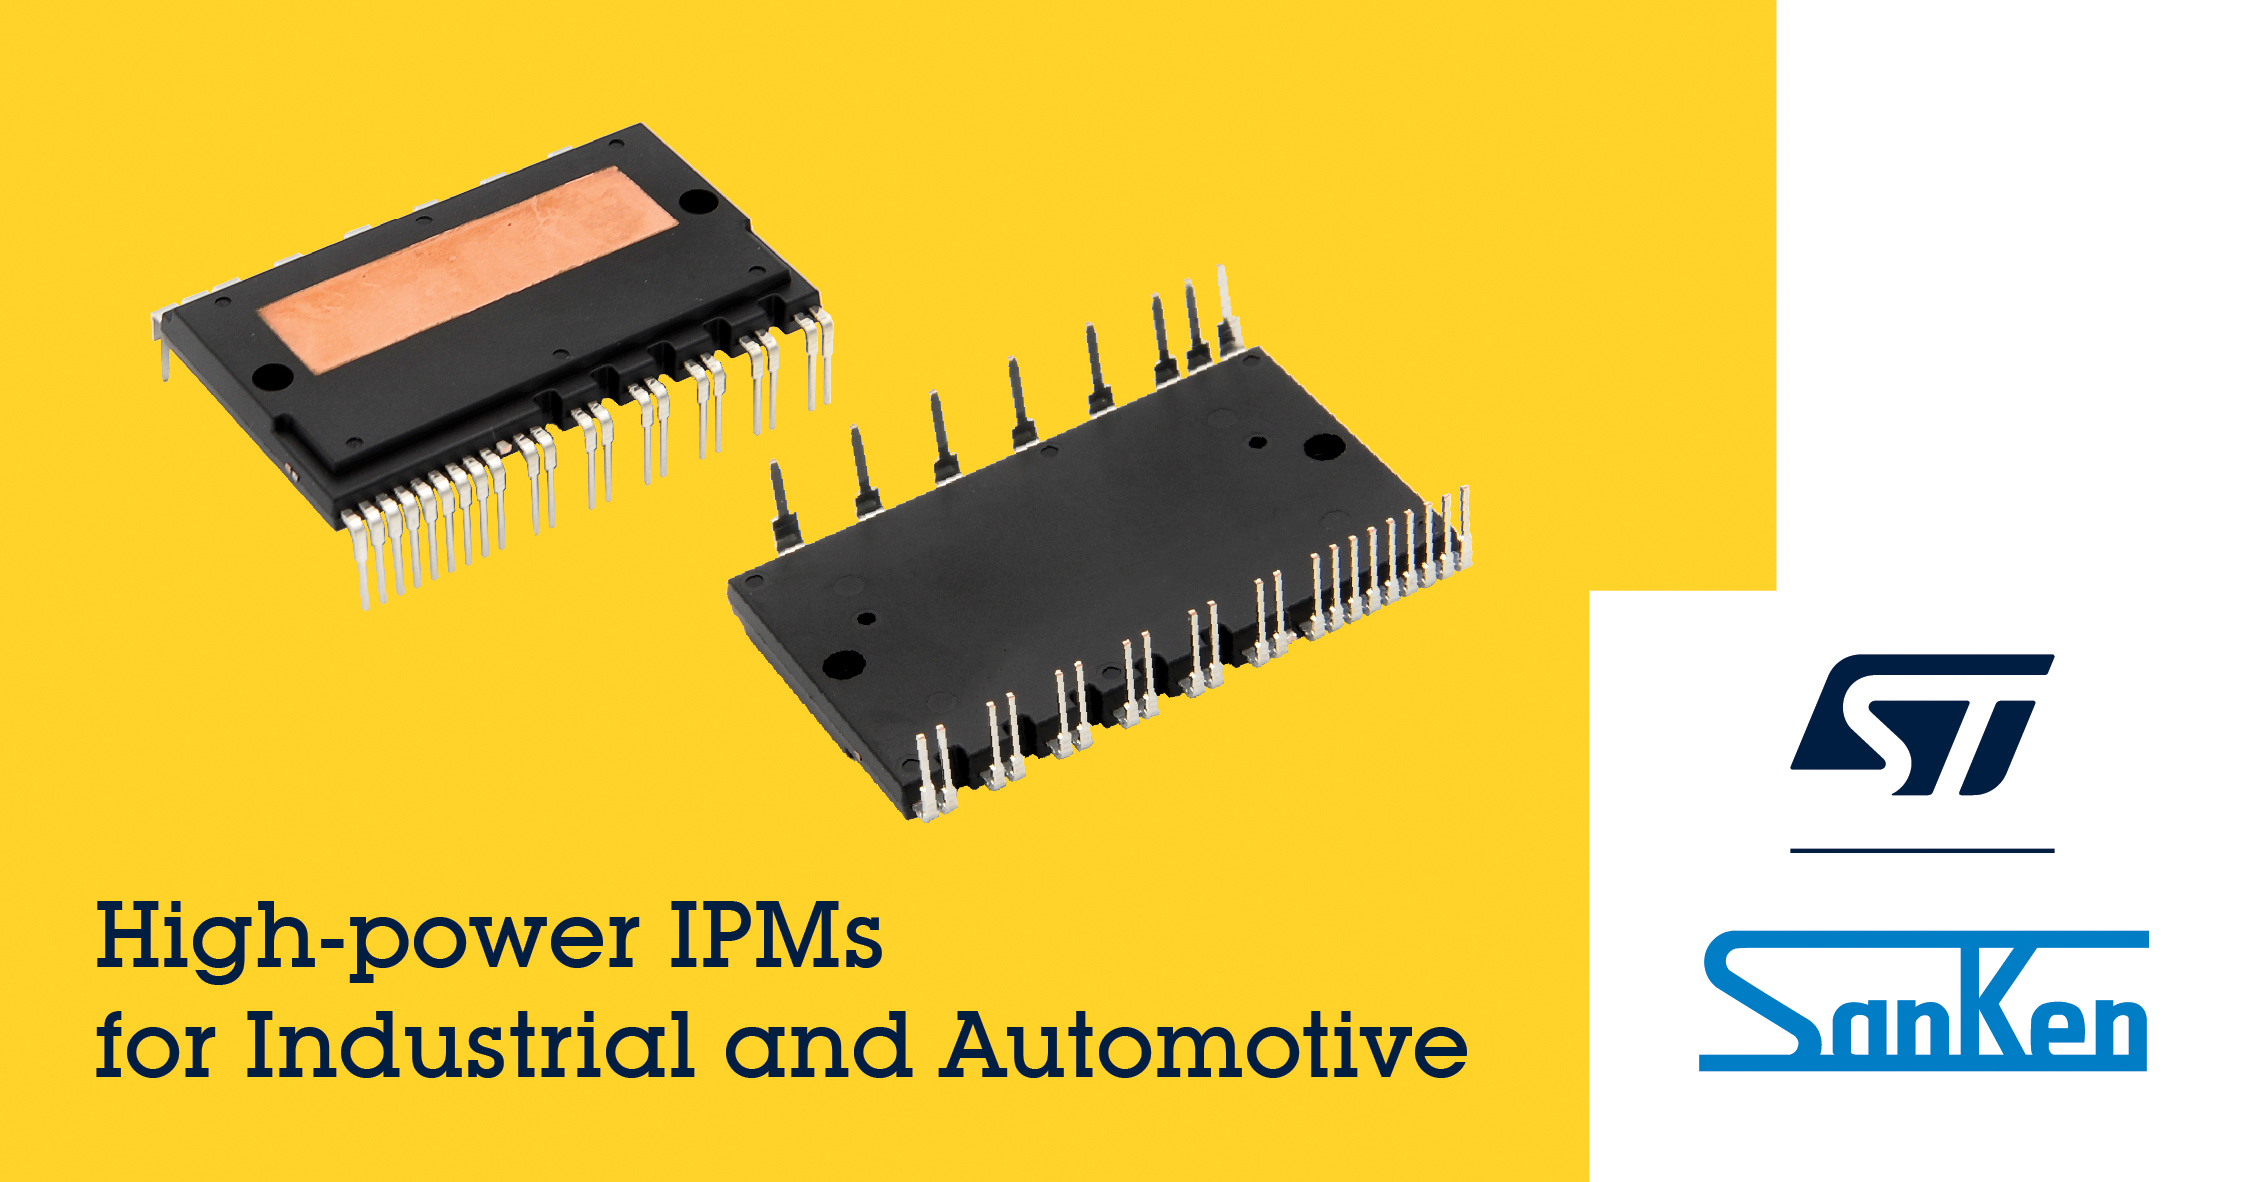 STMicroelectronics and Sanken Announce Strategic Partnership to Develop Intelligent Power Modules for High-Voltage Industrial and Automotive Products